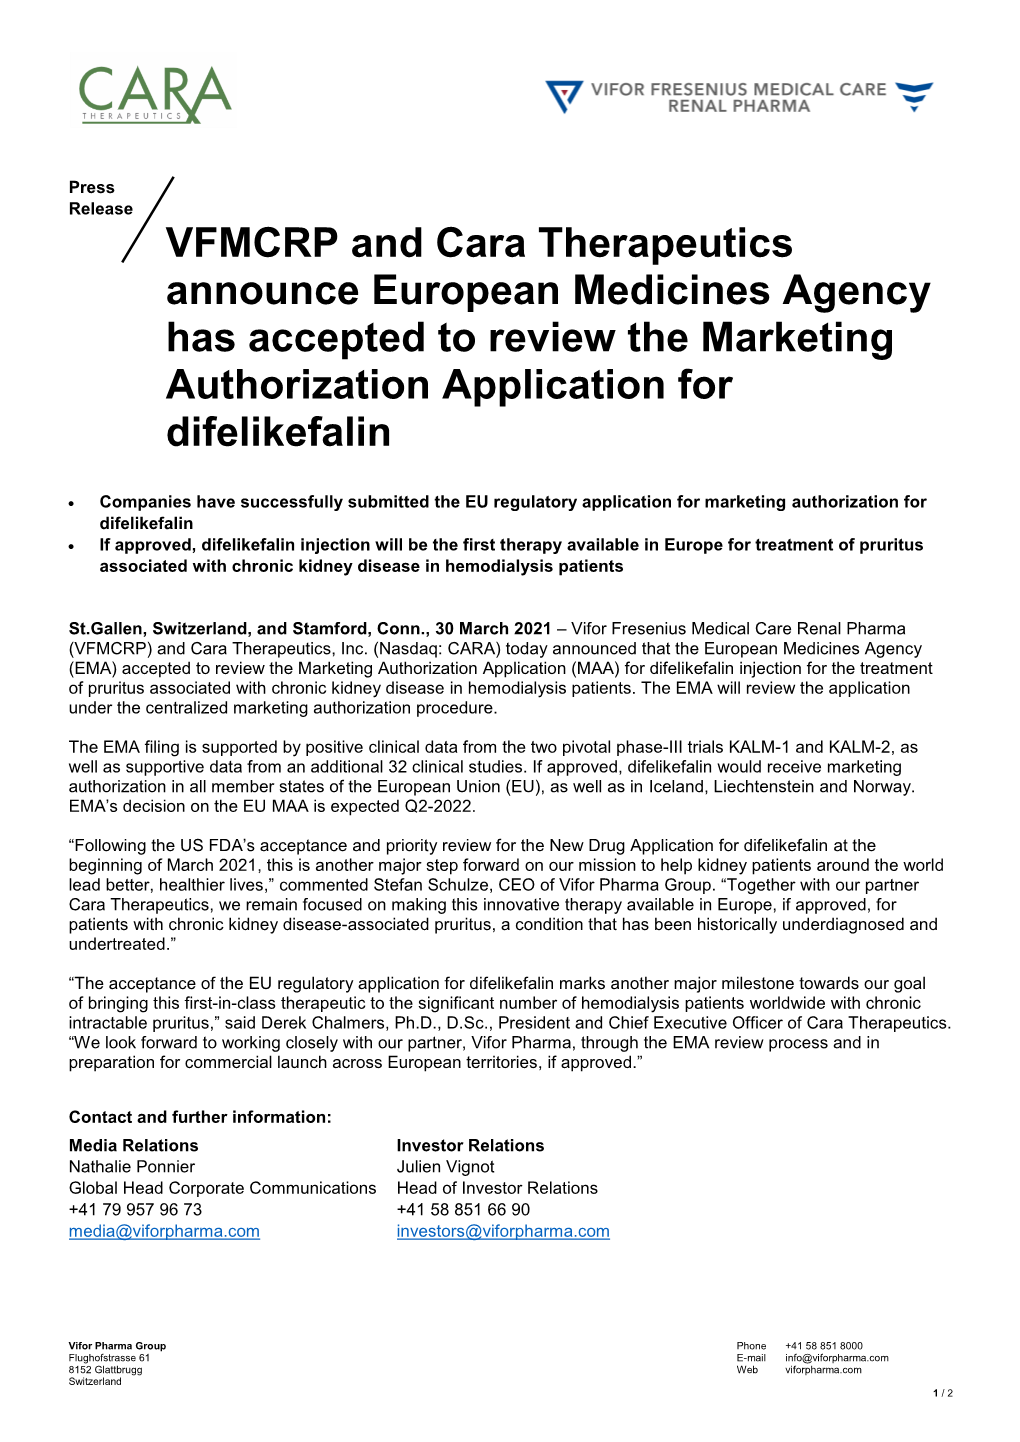 VFMCRP and Cara Therapeutics Announce European Medicines Agency Has Accepted to Review the Marketing Authorization Application for Difelikefalin